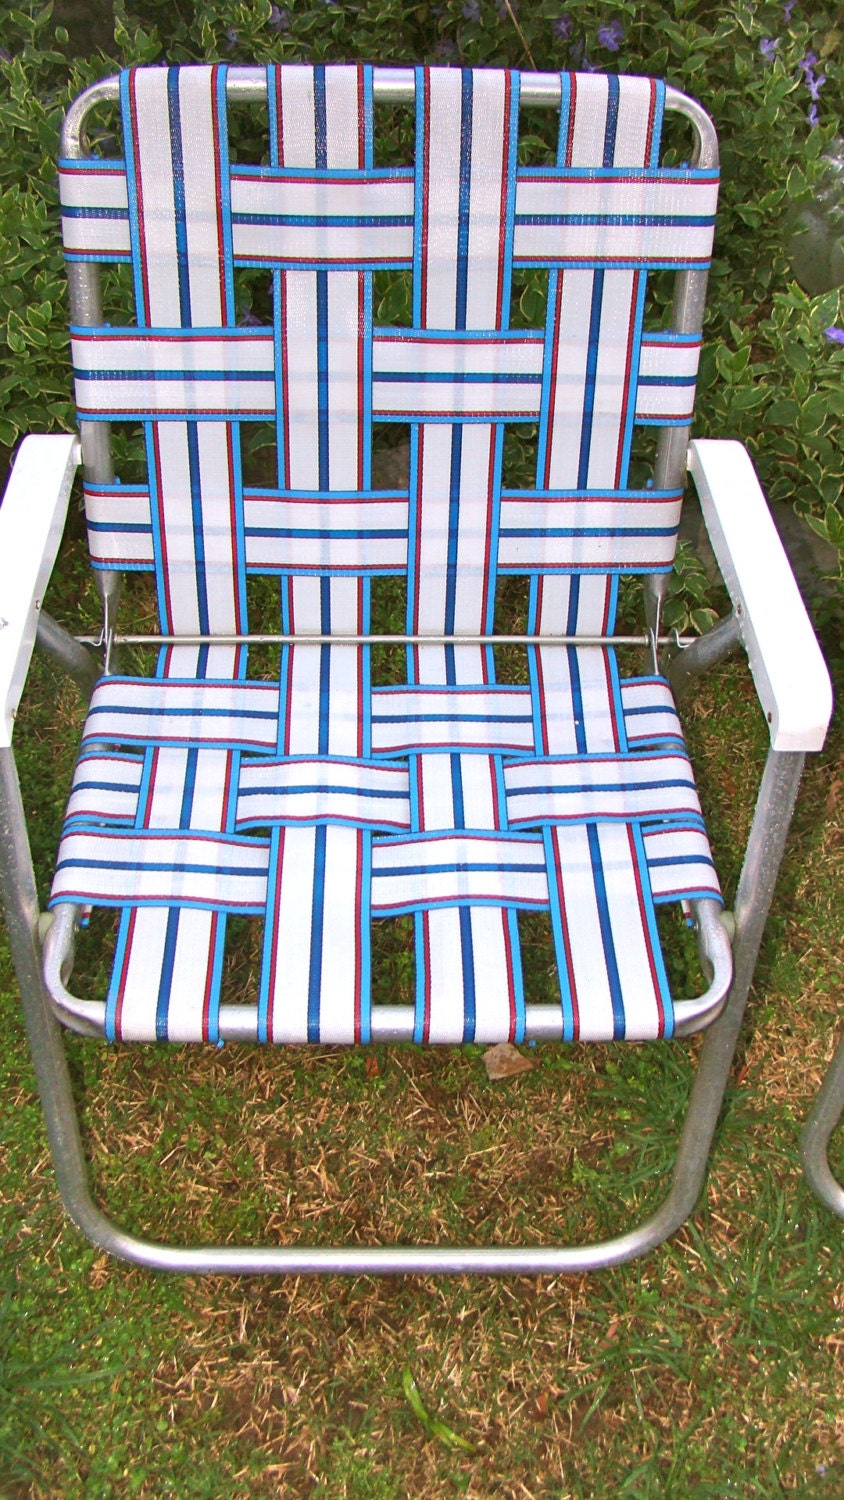 web style aluminum lawn chairs